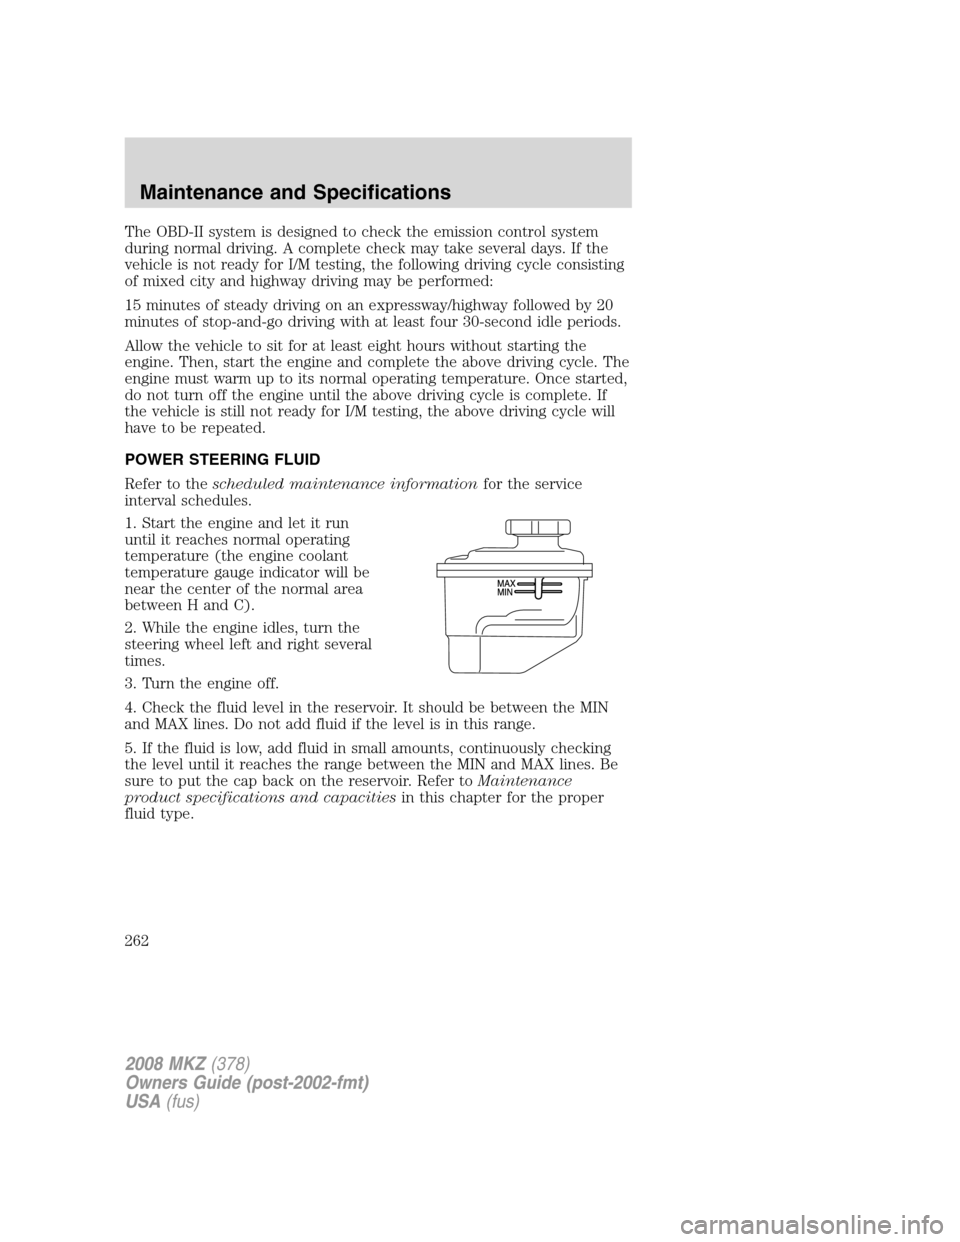 LINCOLN MKZ 2008  Owners Manual The OBD-II system is designed to check the emission control system
during normal driving. A complete check may take several days. If the
vehicle is not ready for I/M testing, the following driving cyc